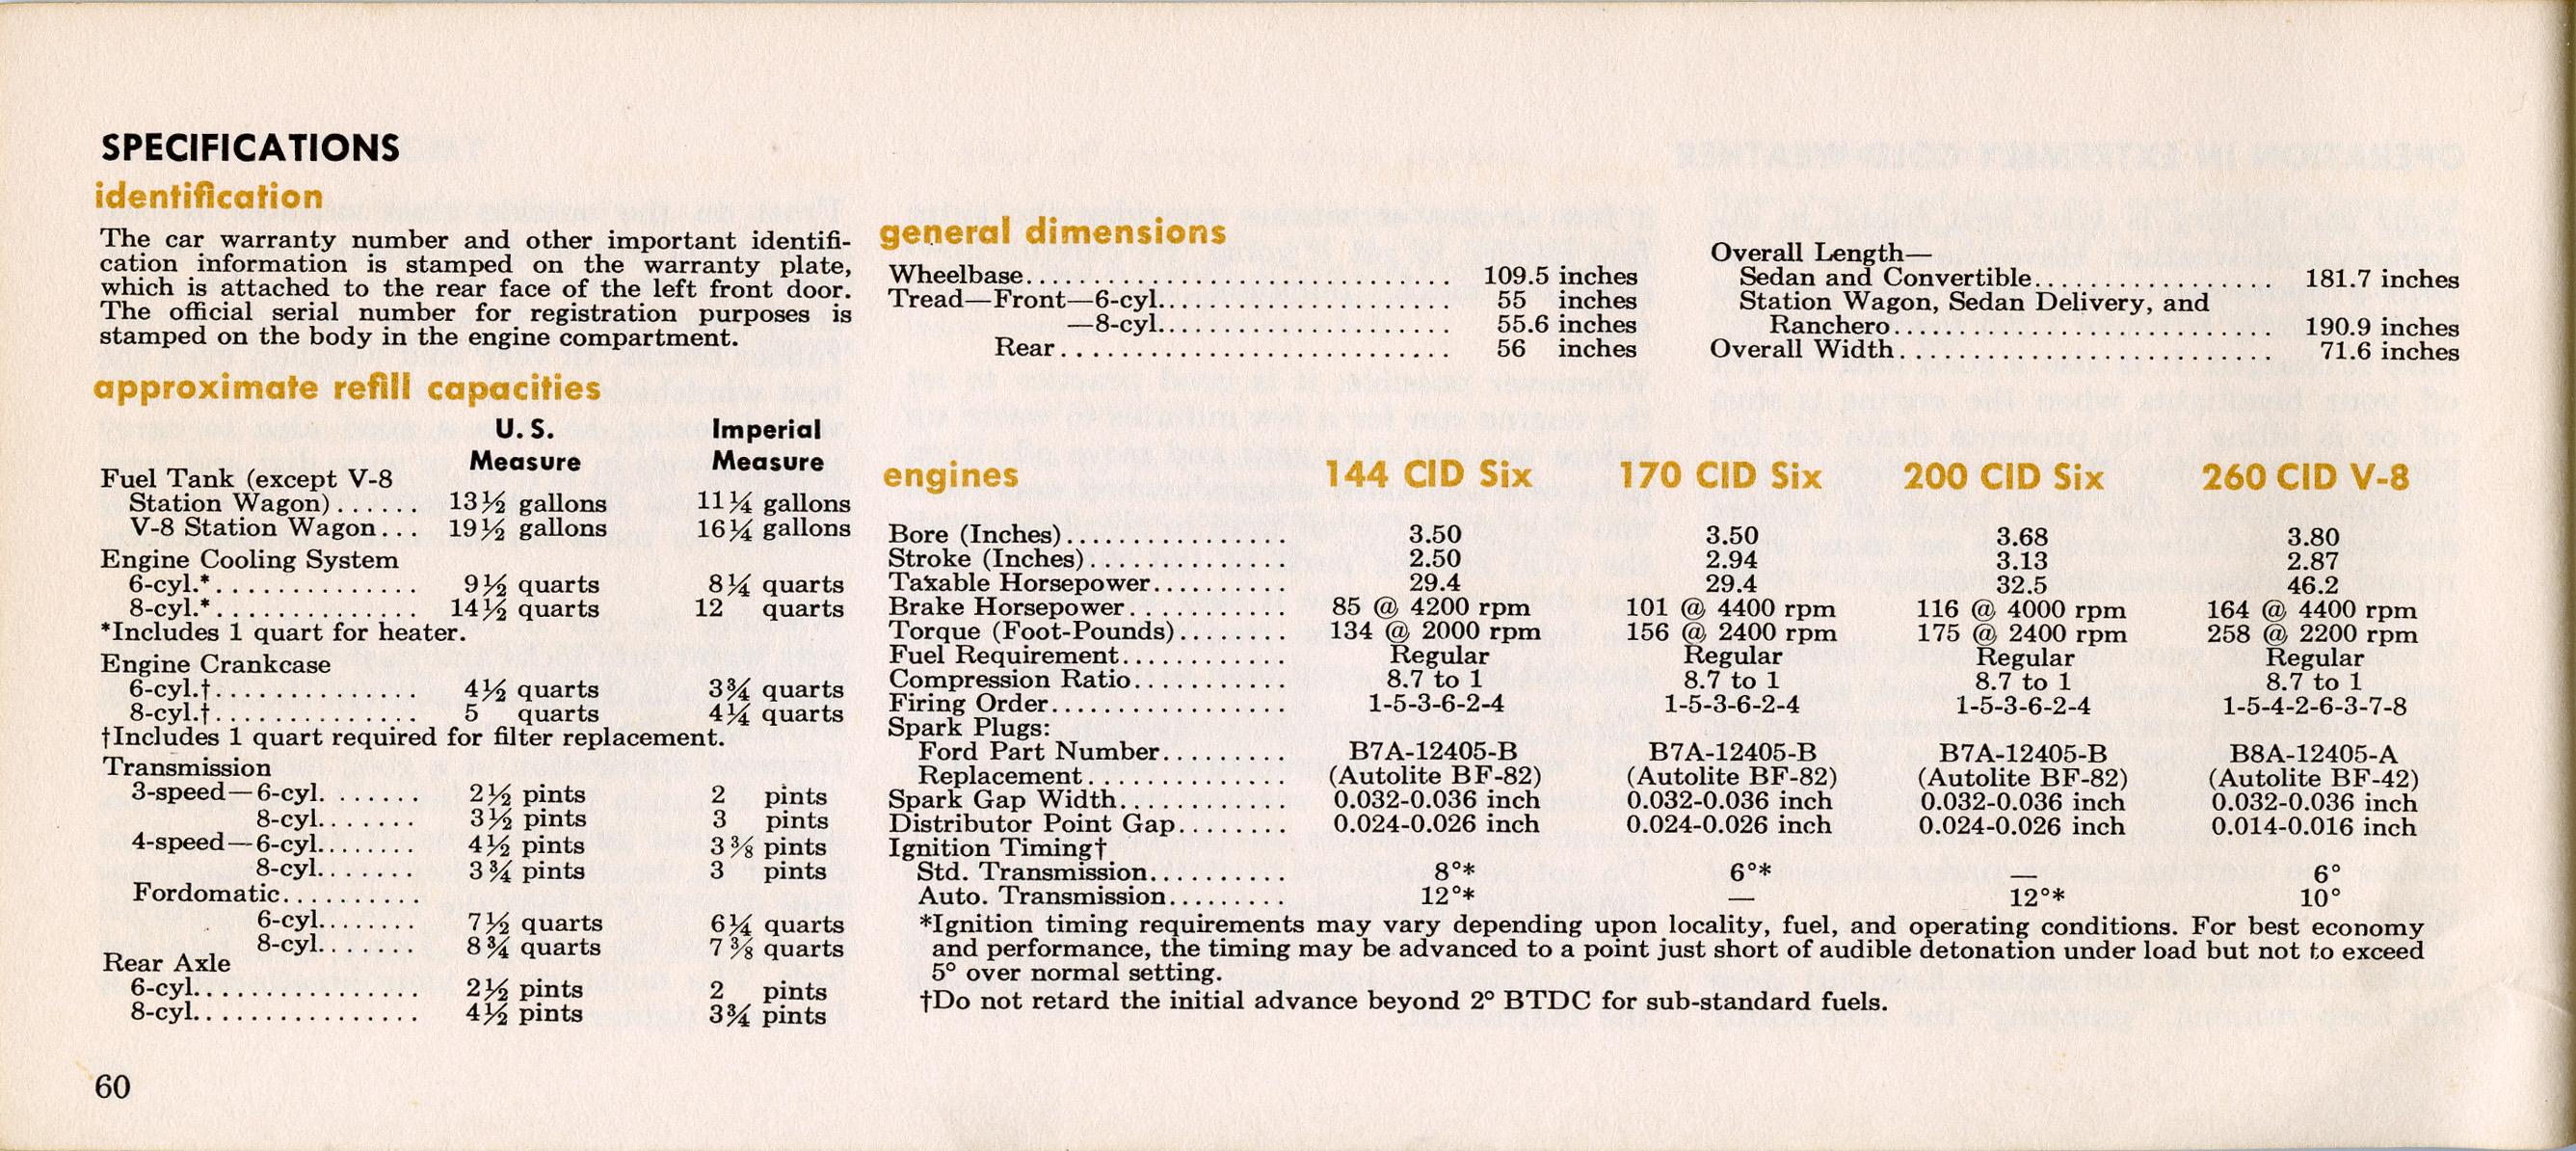 1964_Ford_Falcon_Owners_Manual-60